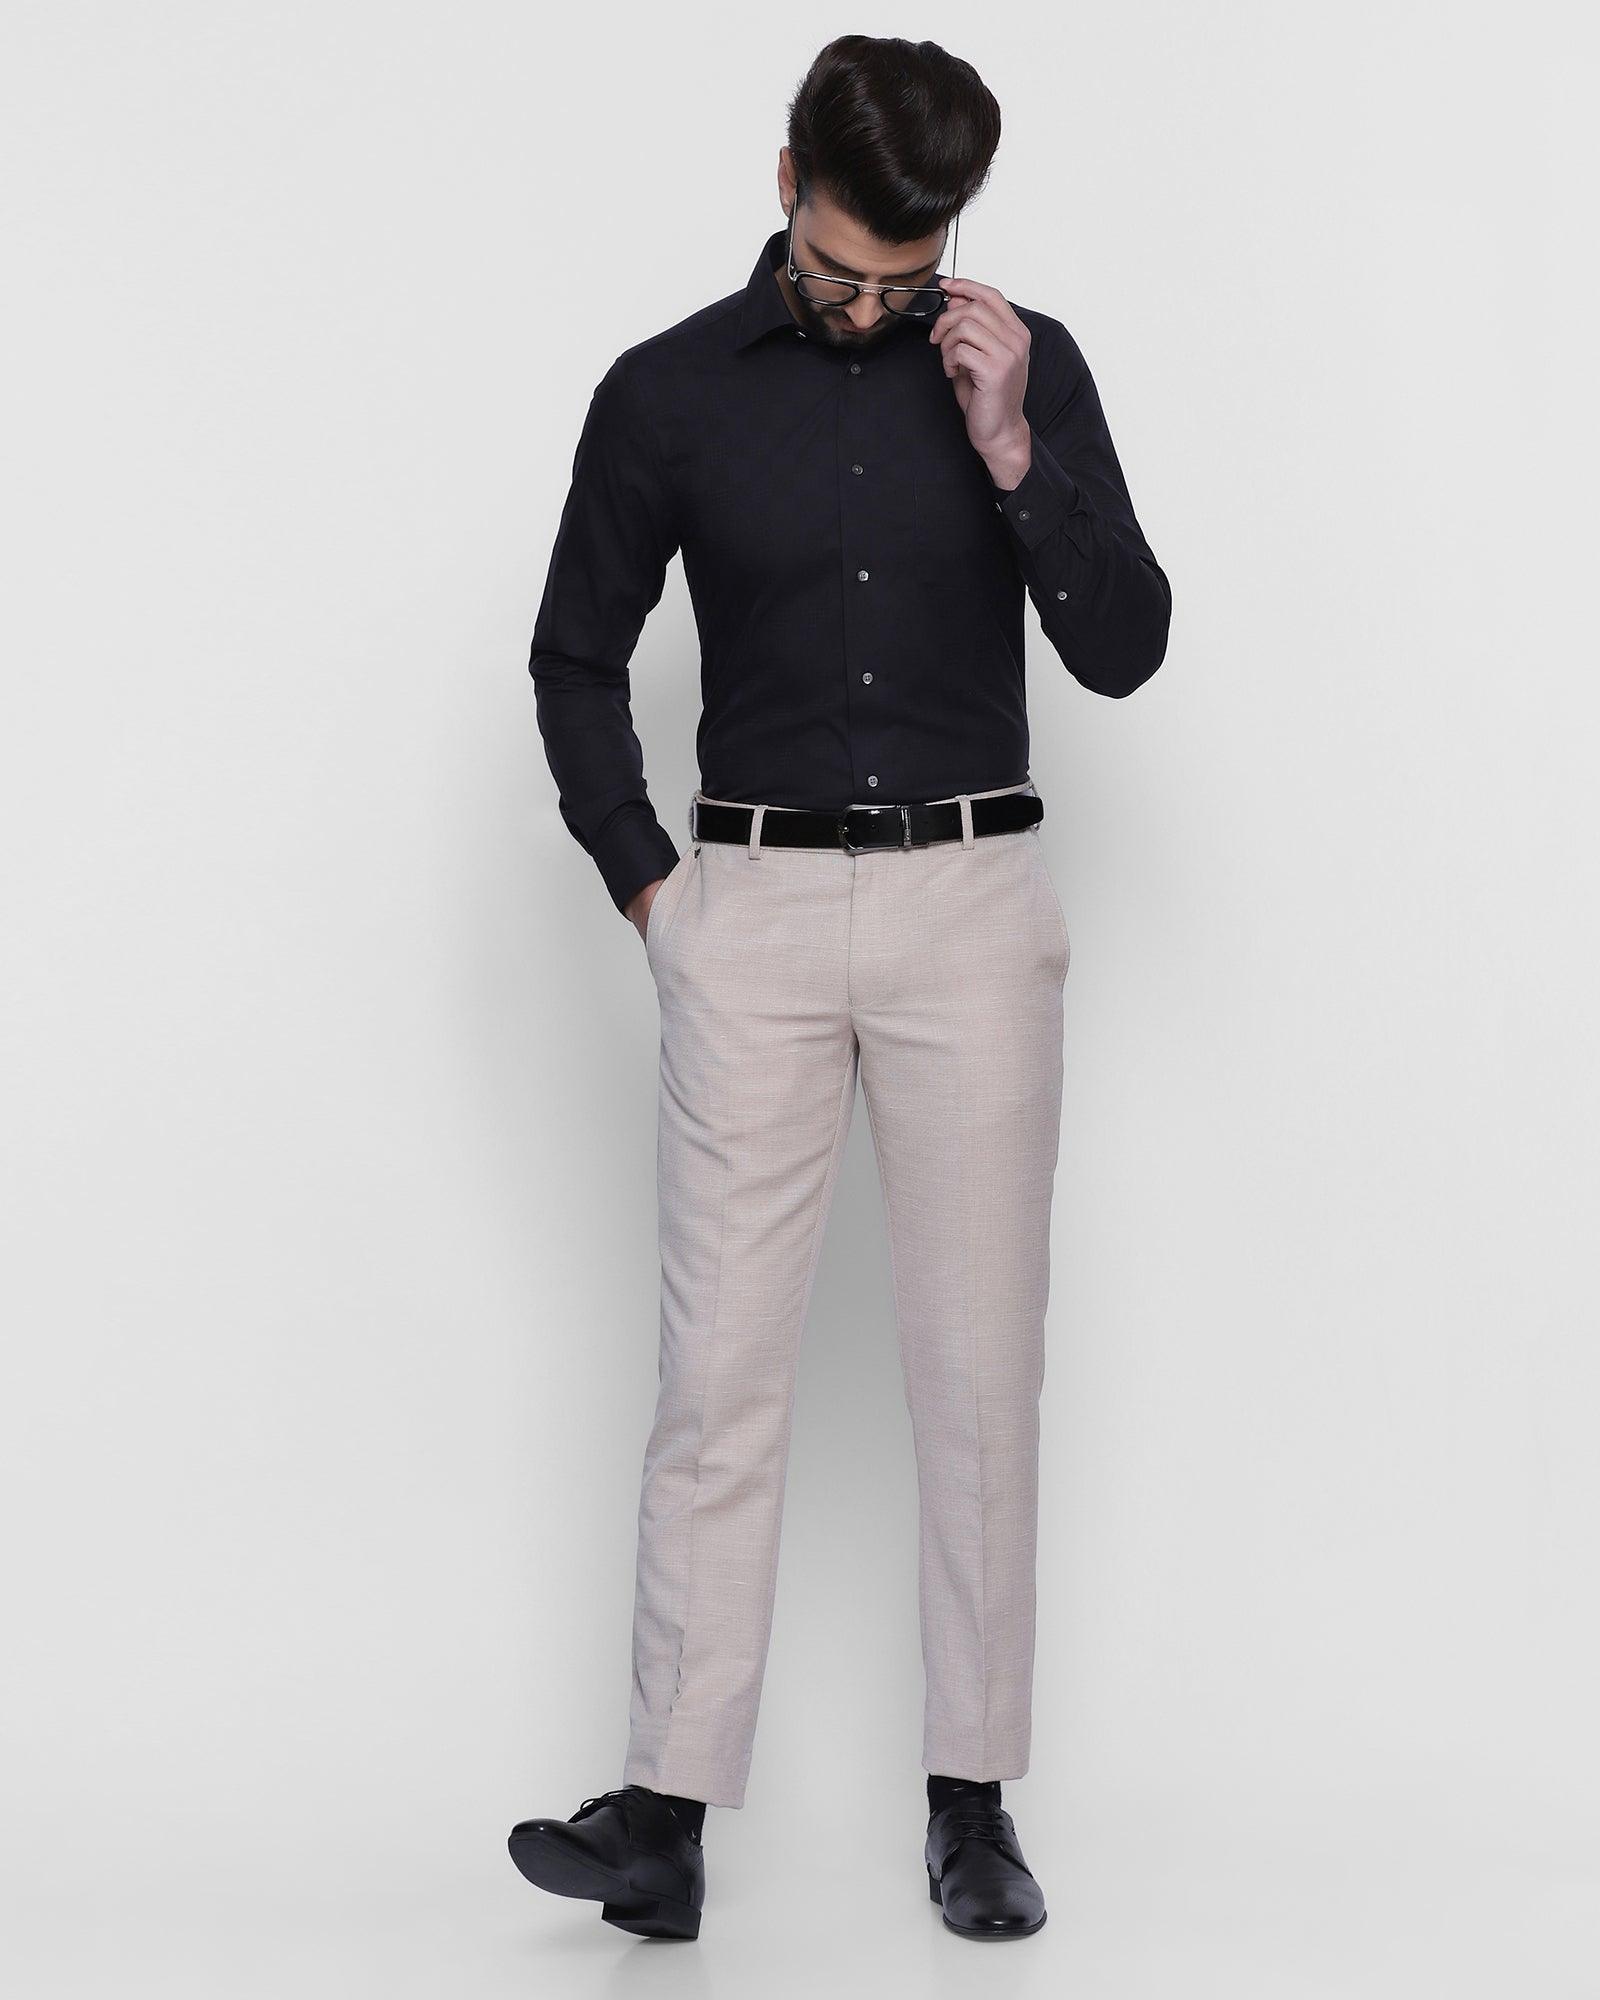 Luxe Formal Black Solid Shirt - Dior